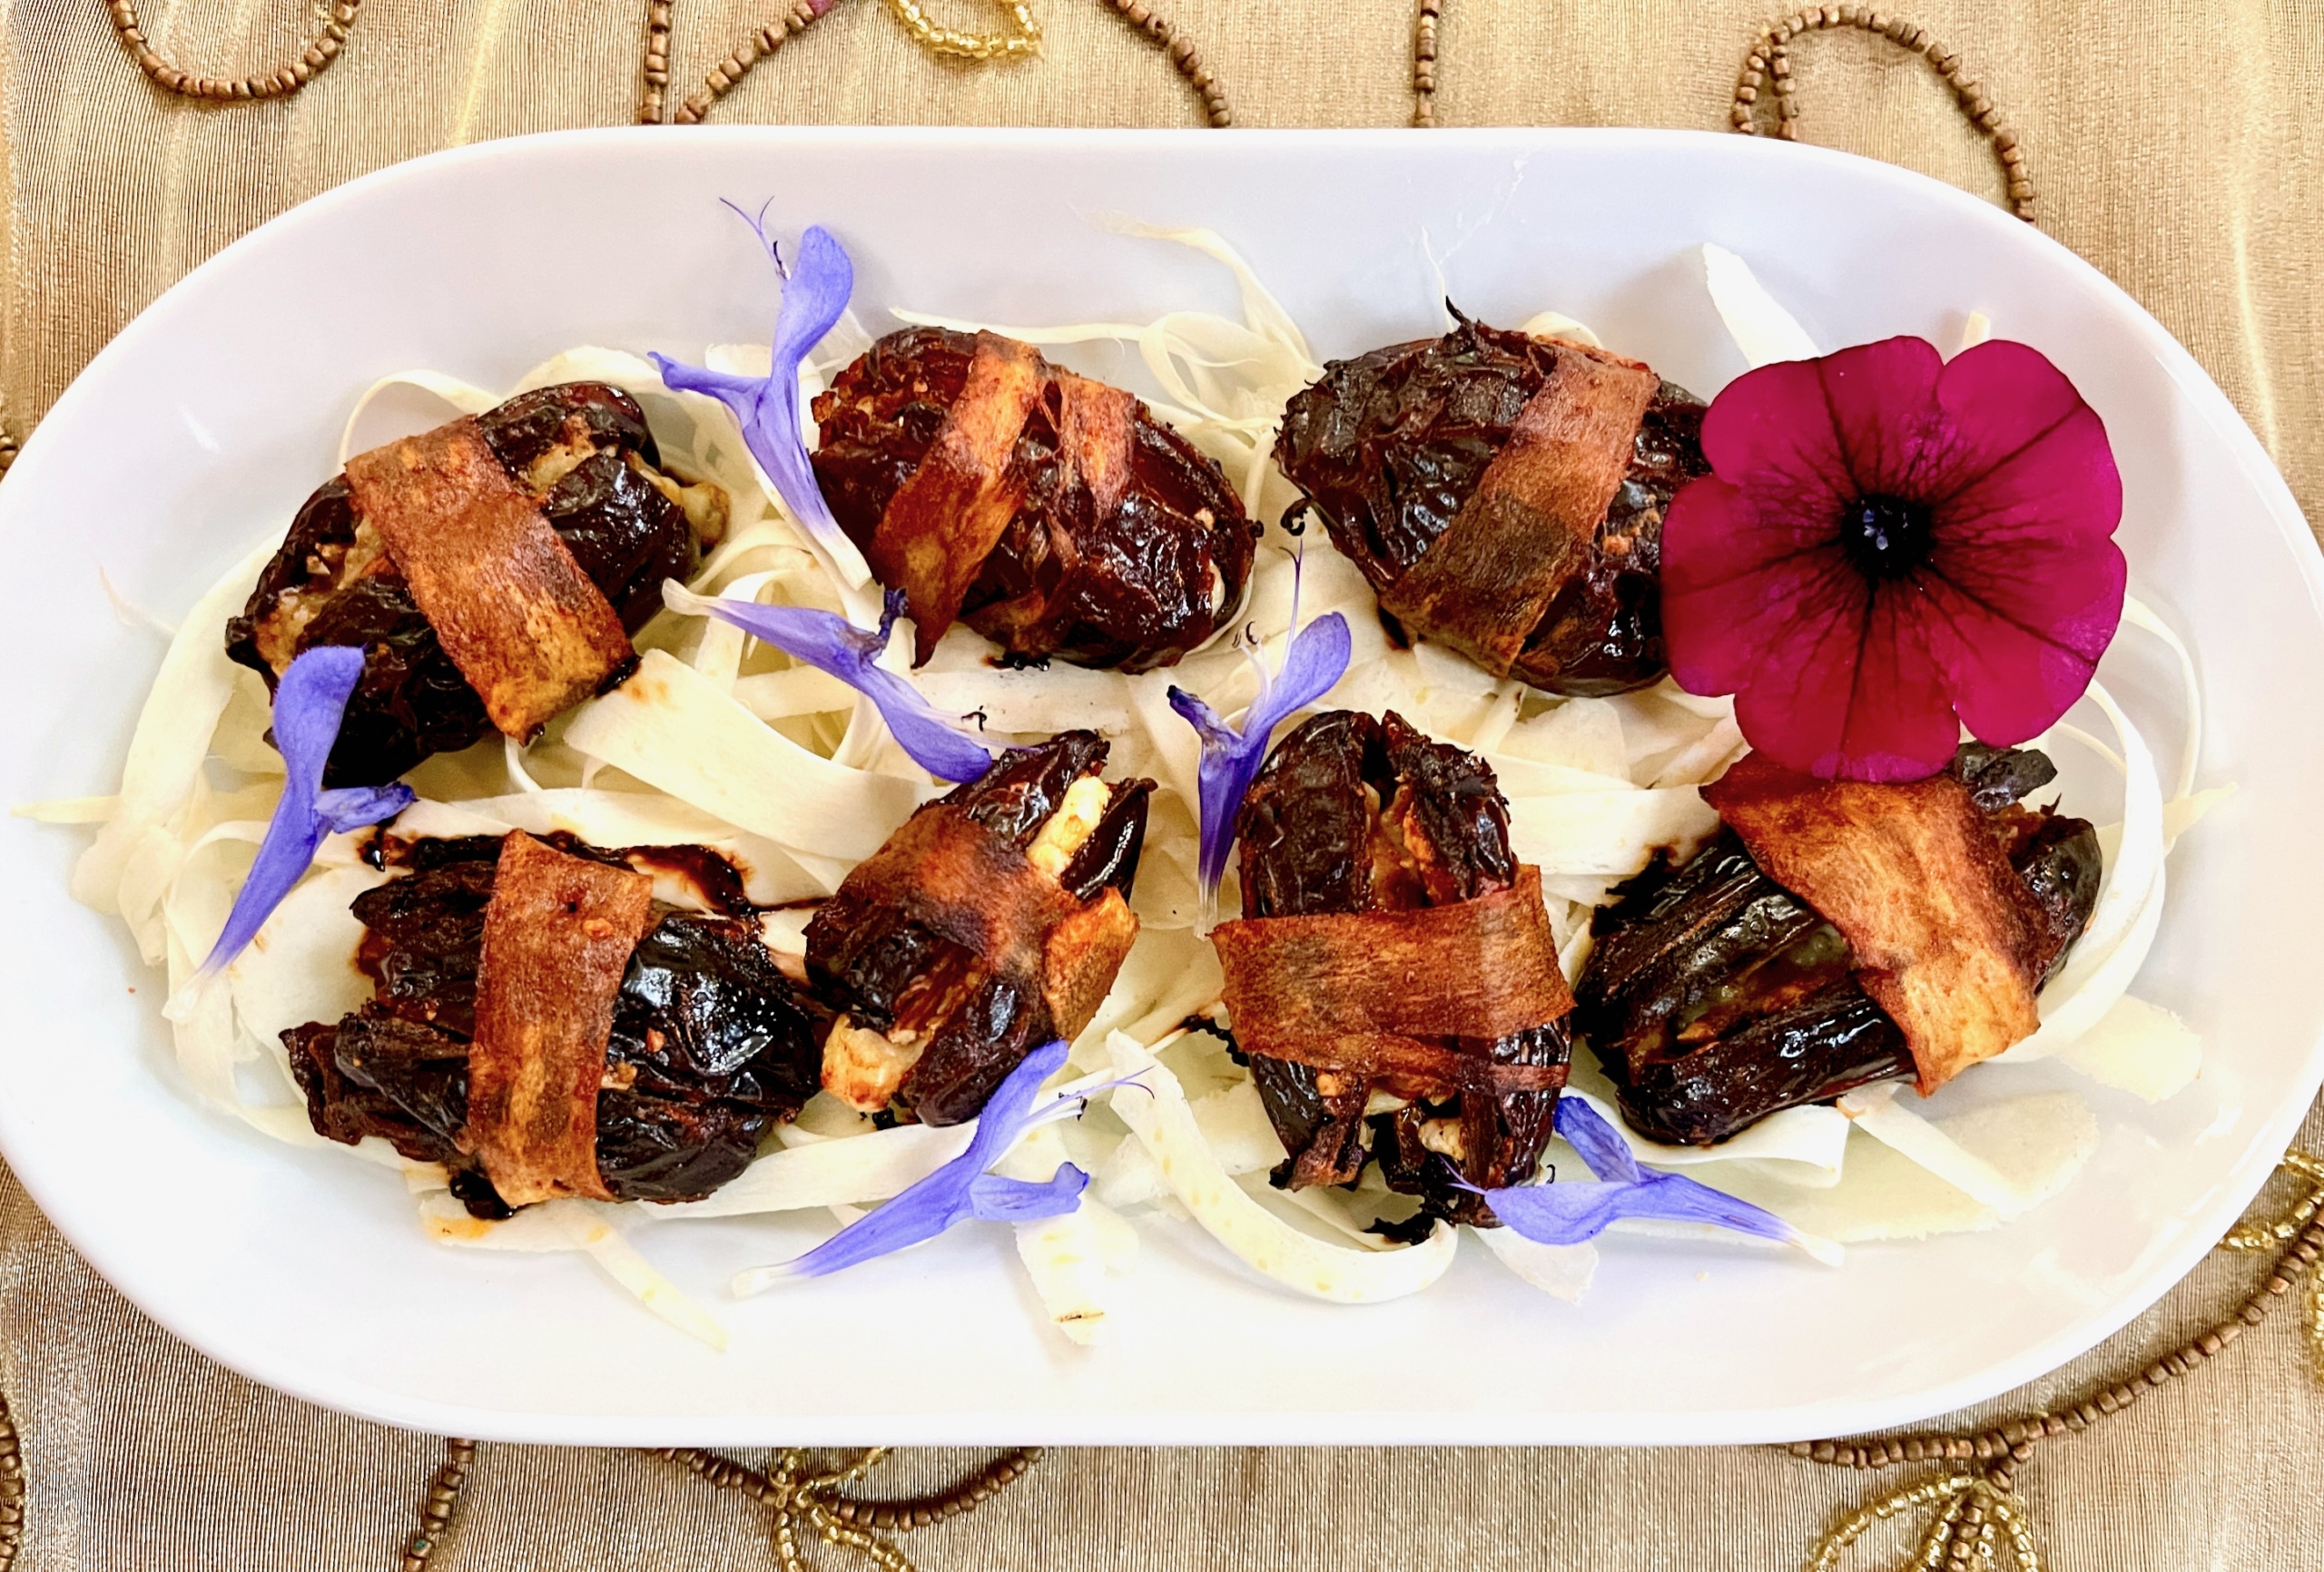 Parsnip-Wrapped Stuffed Dates